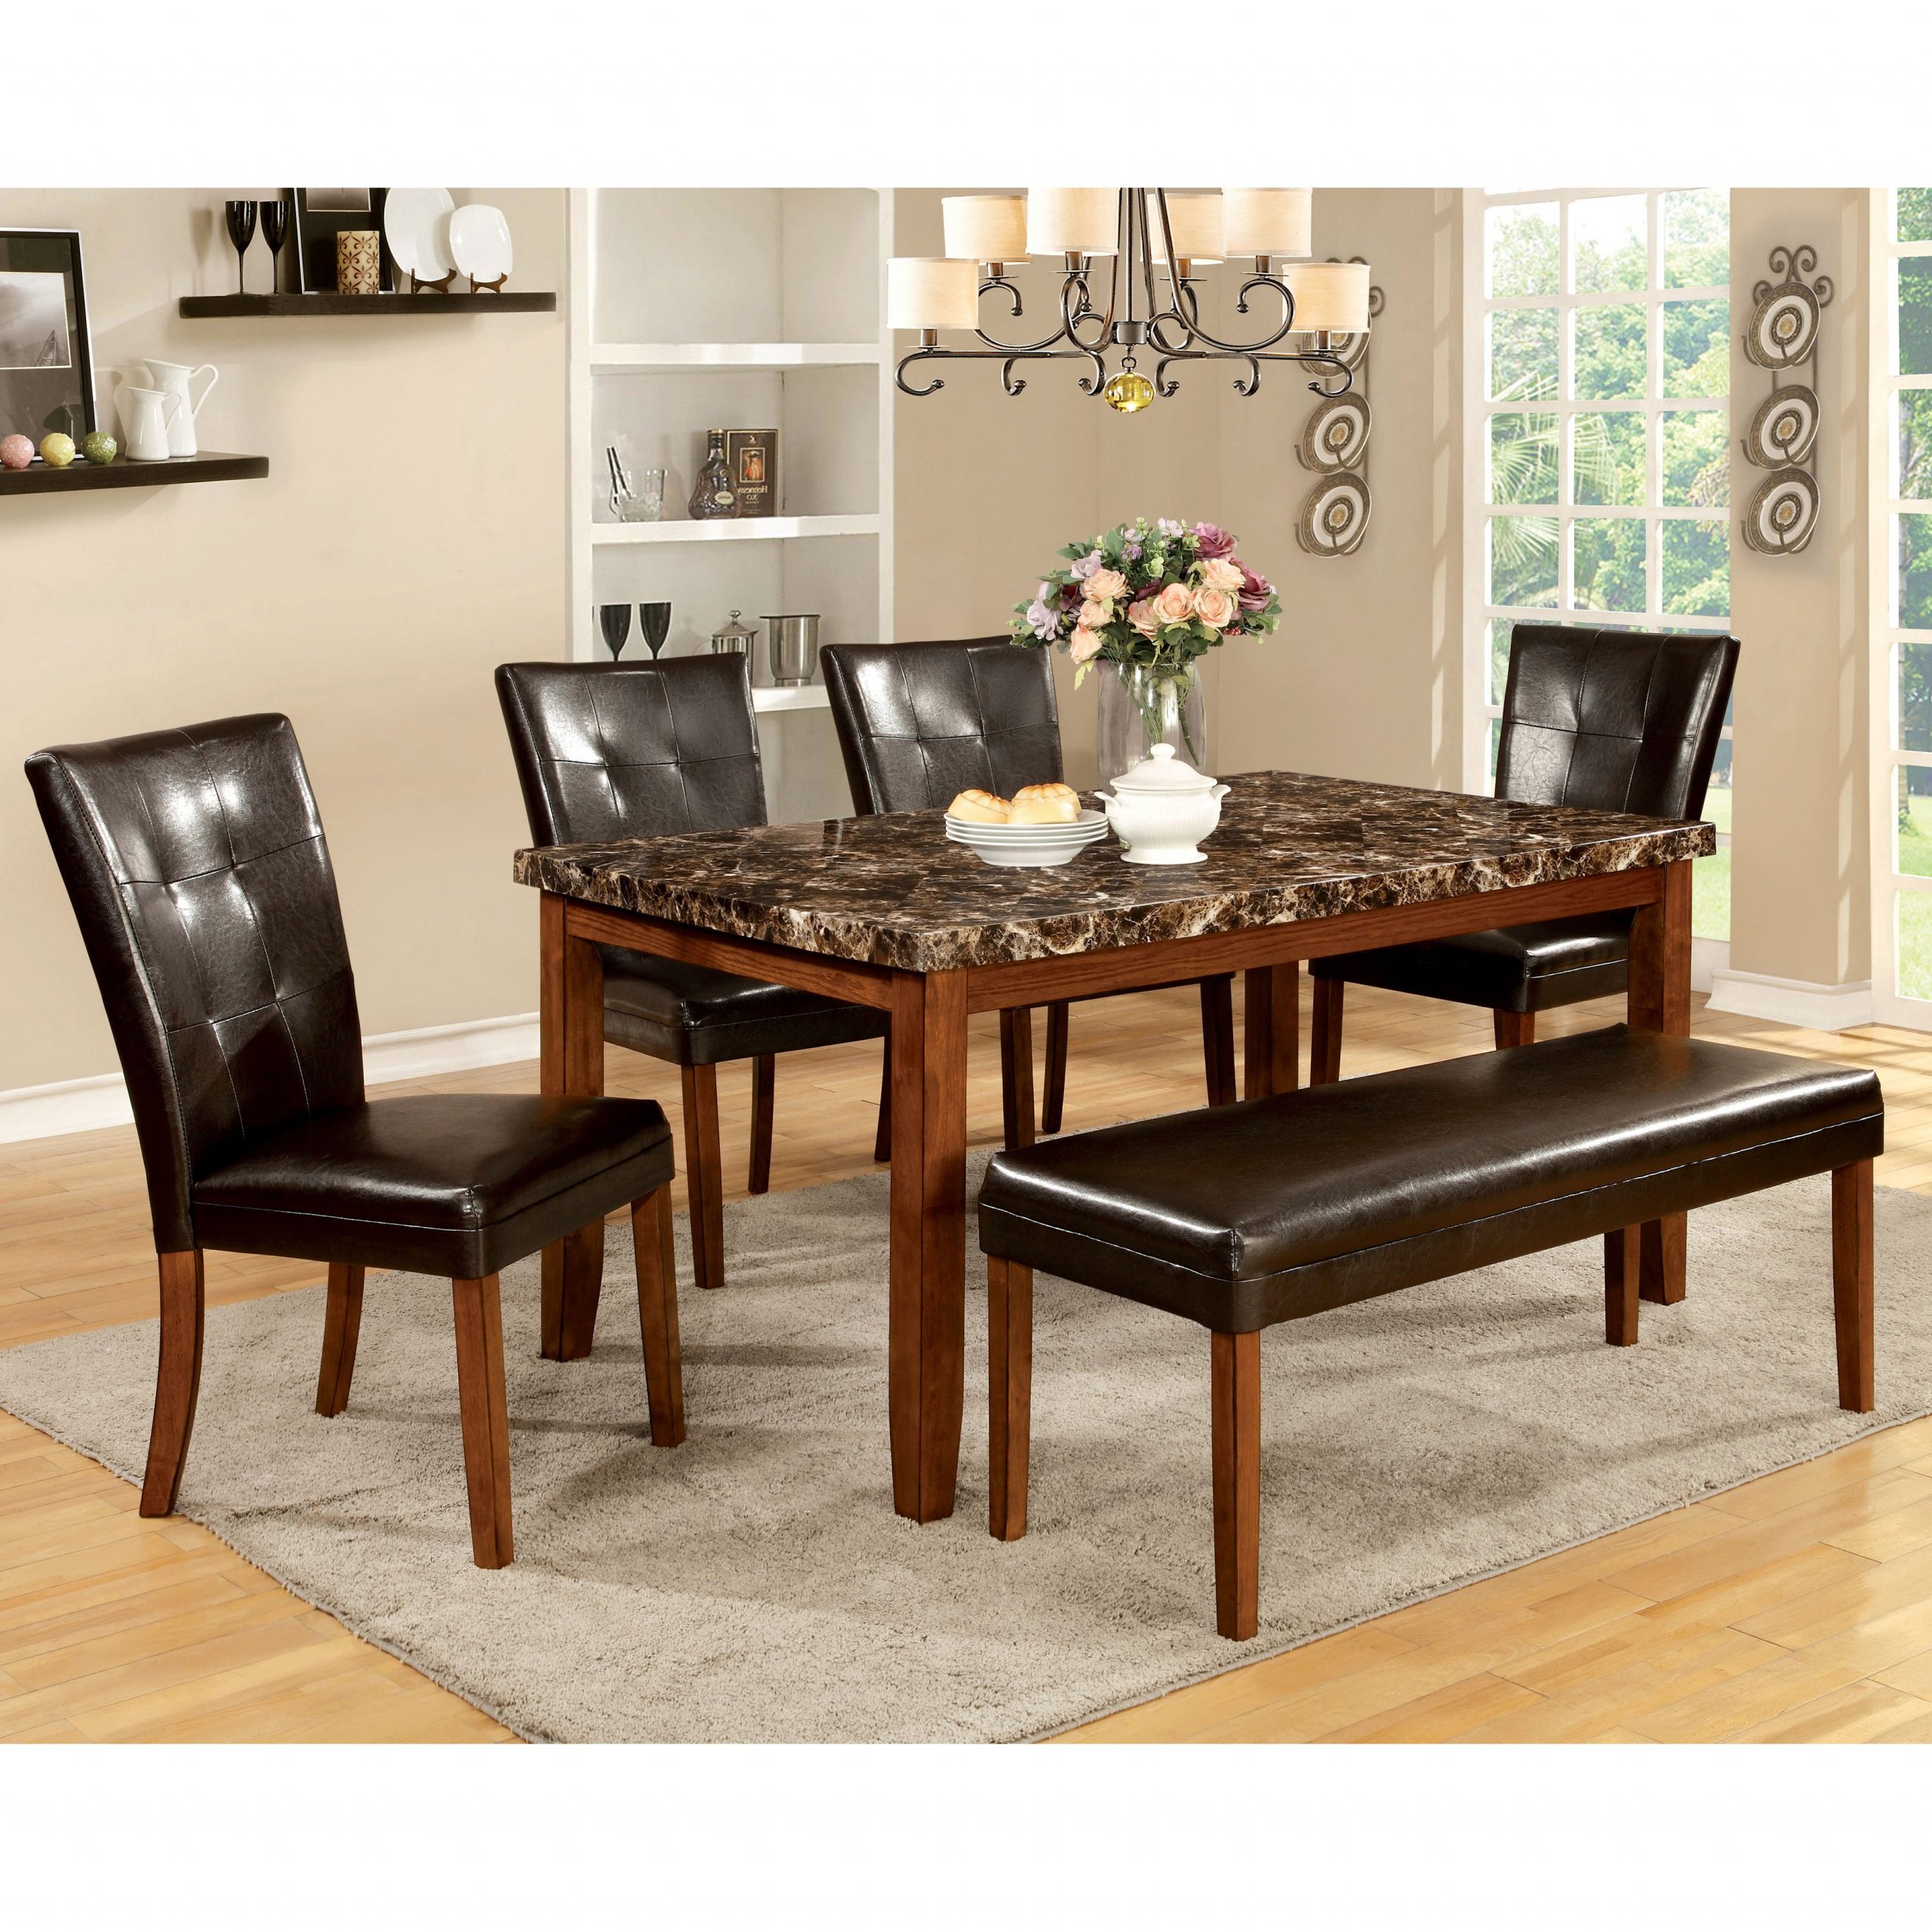 Furniture Of America Yols Contemporary Oak 60 Inch Dining Table pertaining to dimensions 3500 X 3500